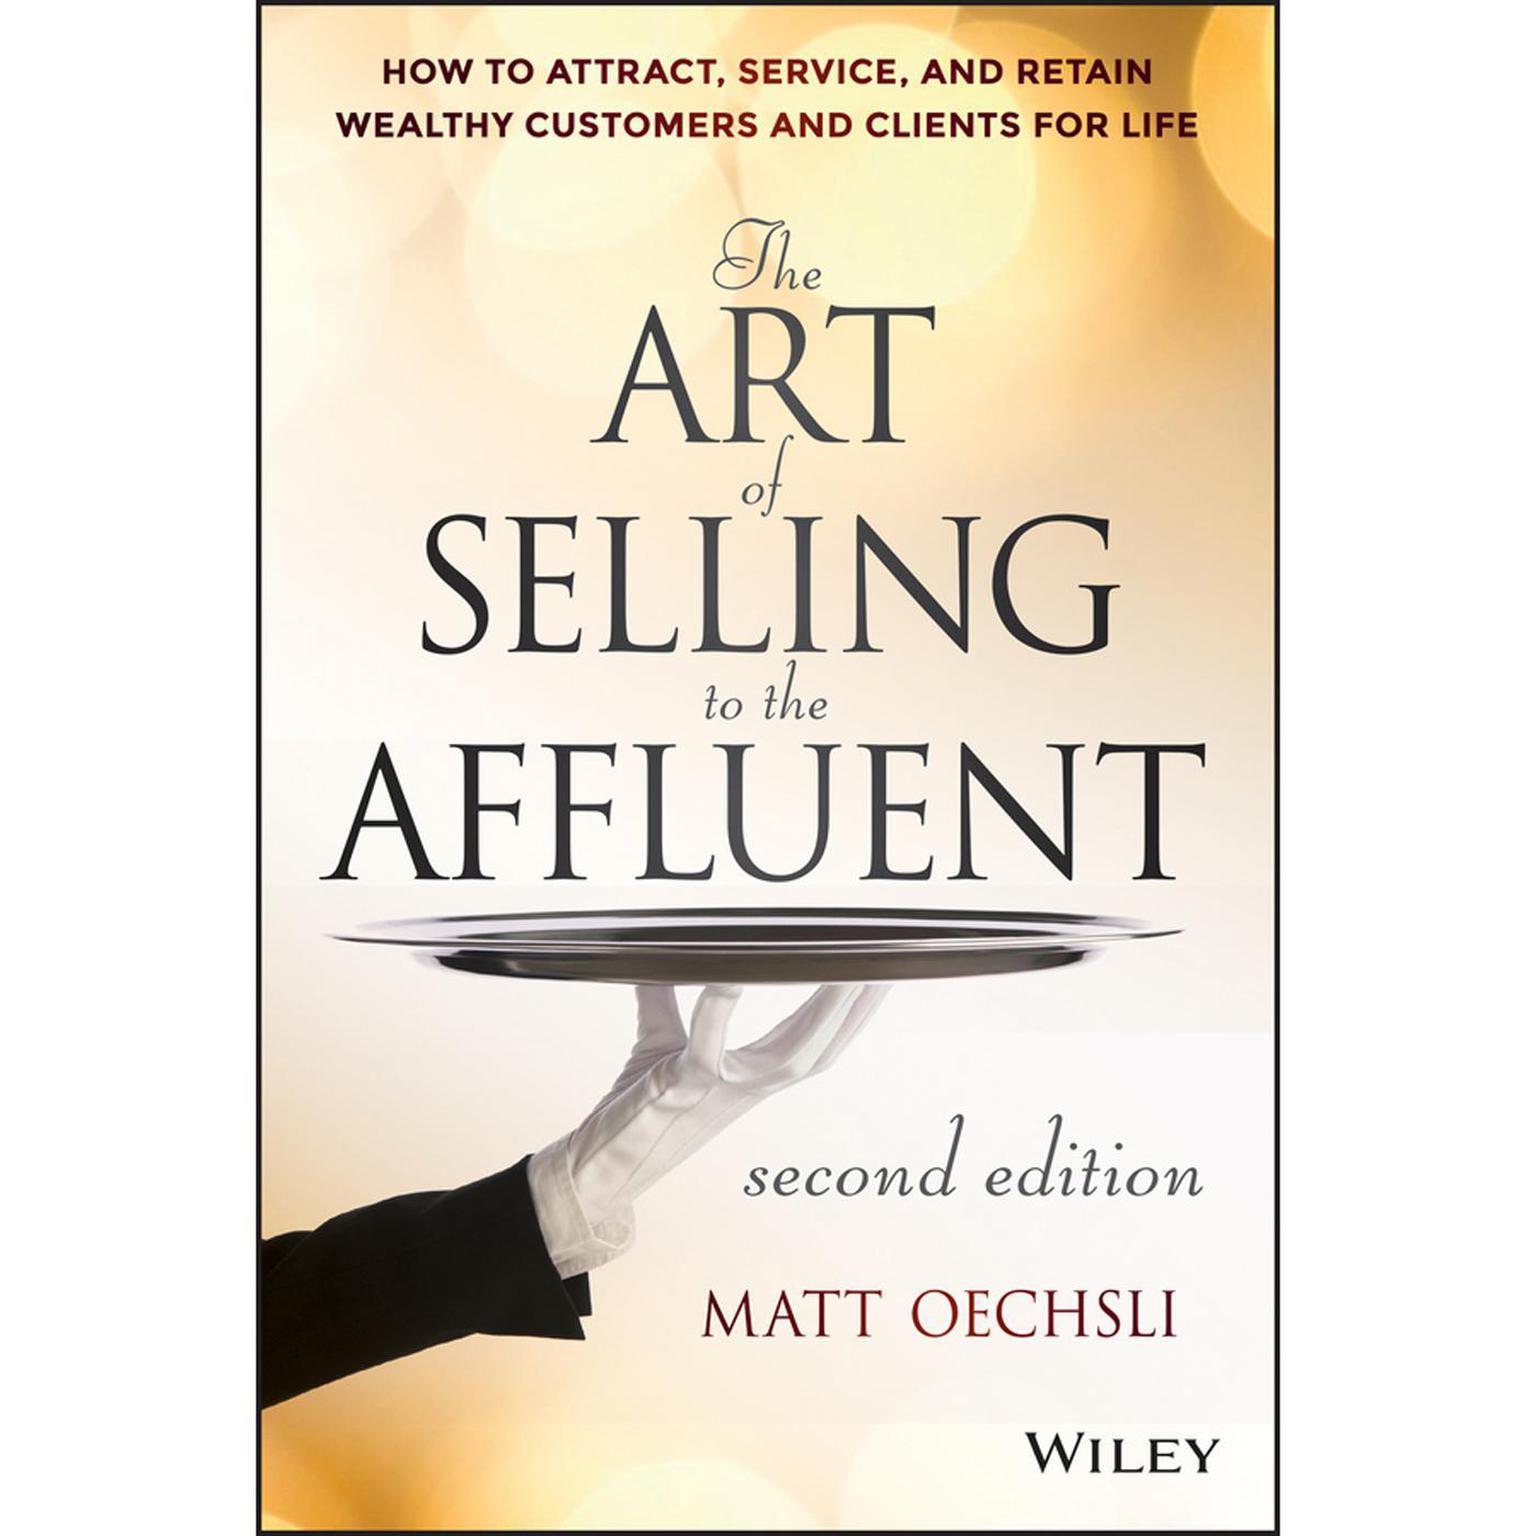 The Art of Selling to the Affluent: How to Attract, Service, and Retain Wealthy Customers and Clients for Life Audiobook, by Matt Oechsli